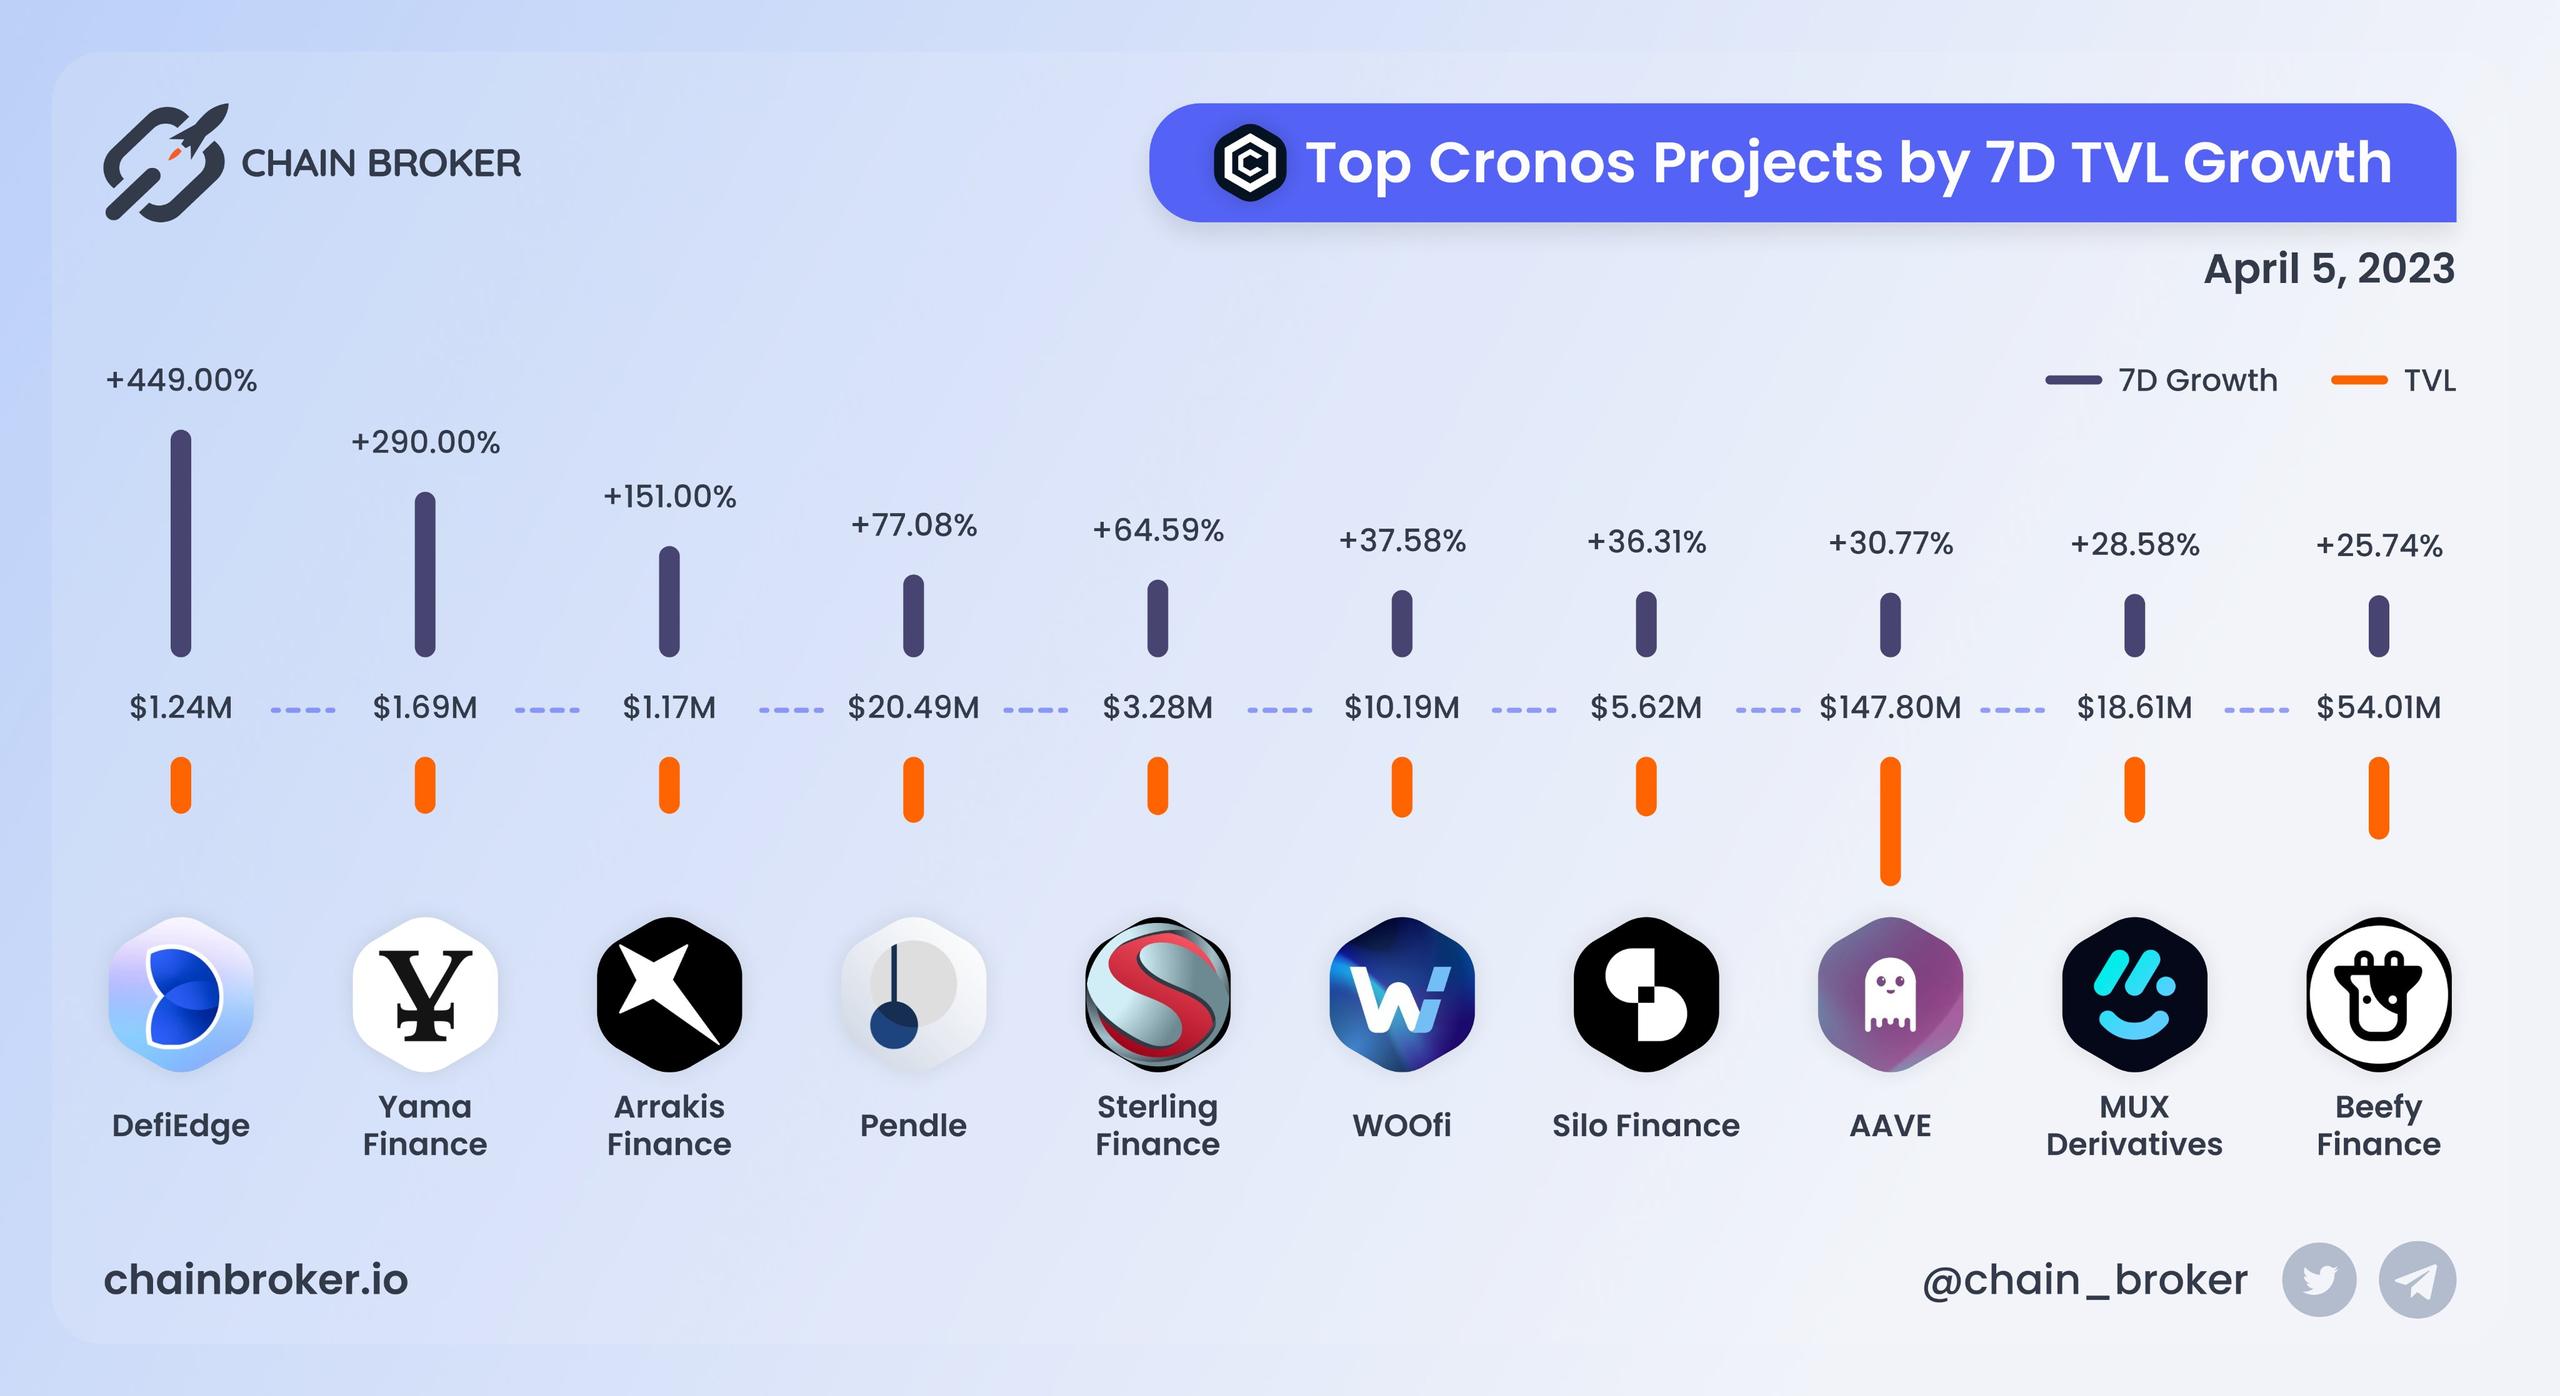 Top Cronos projects by 7d TVL growth